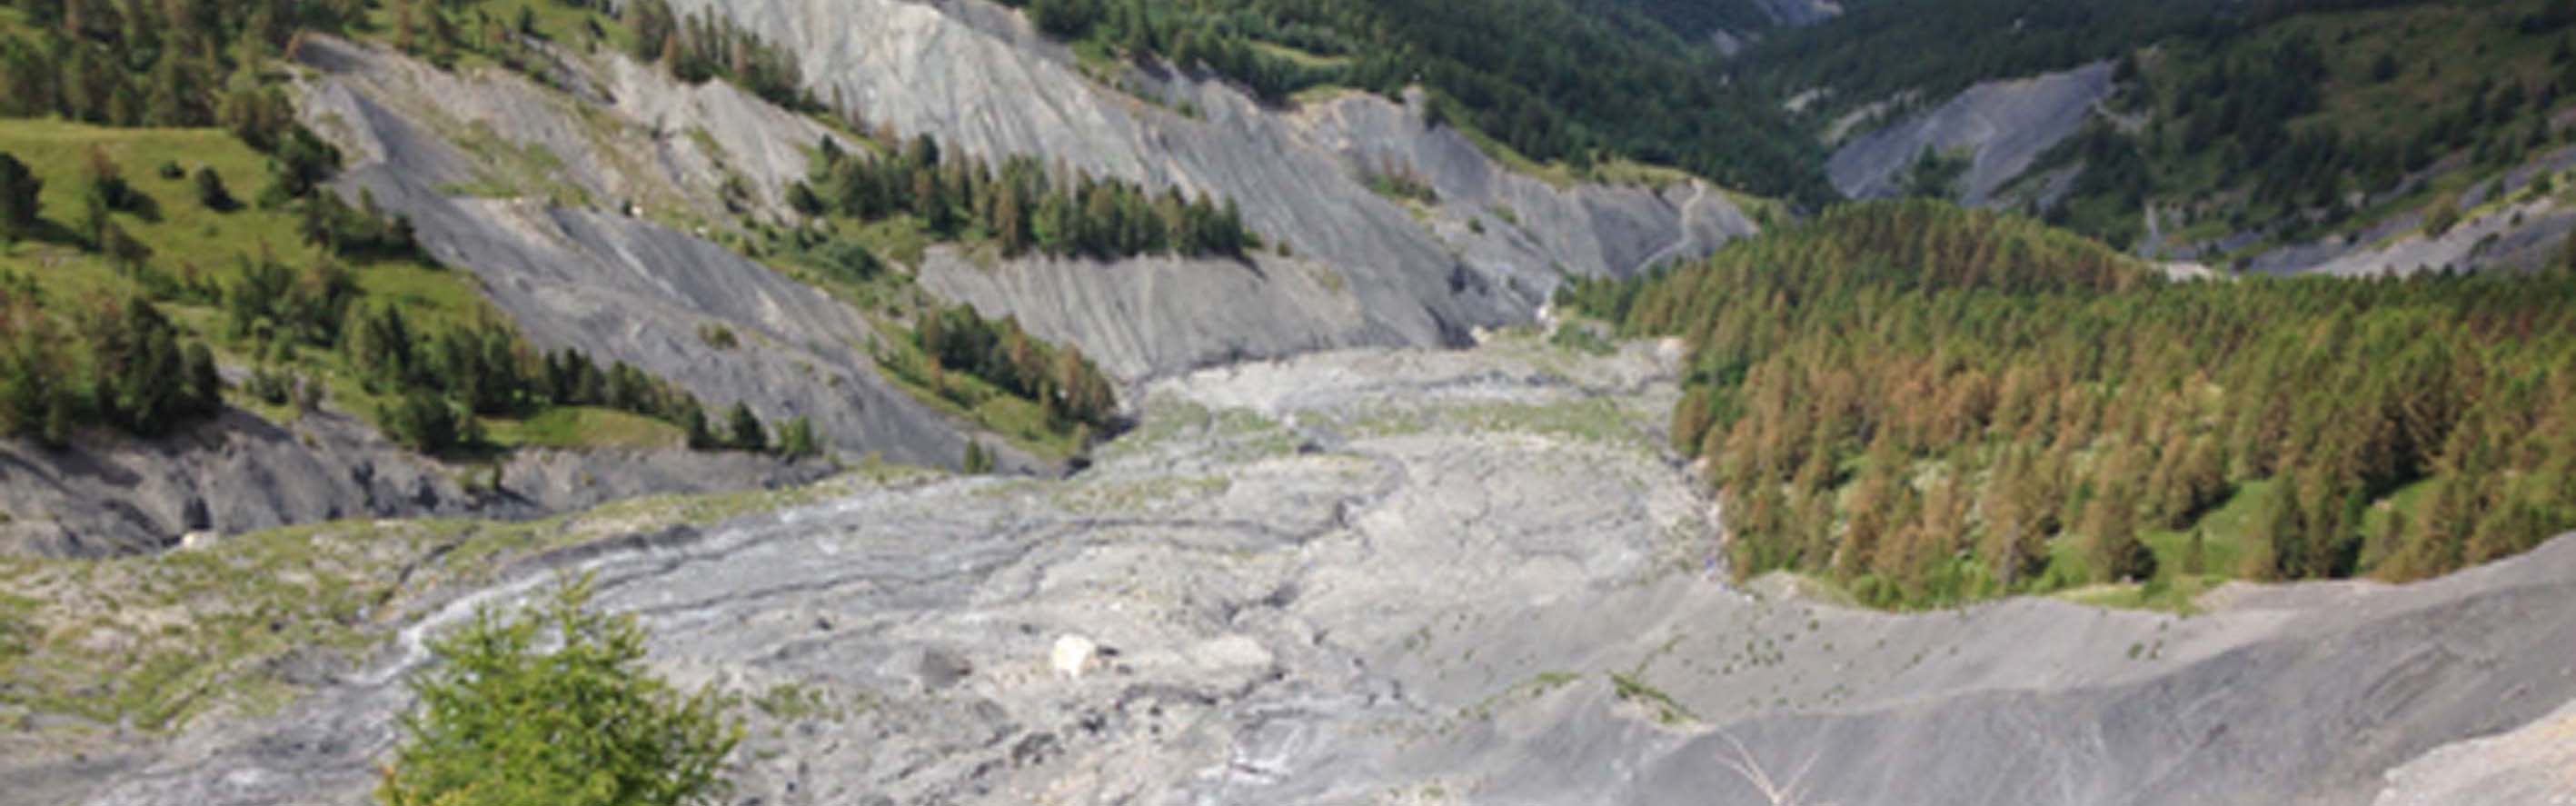 Super-Sauze landslide: view of the accumulation zone in 2016